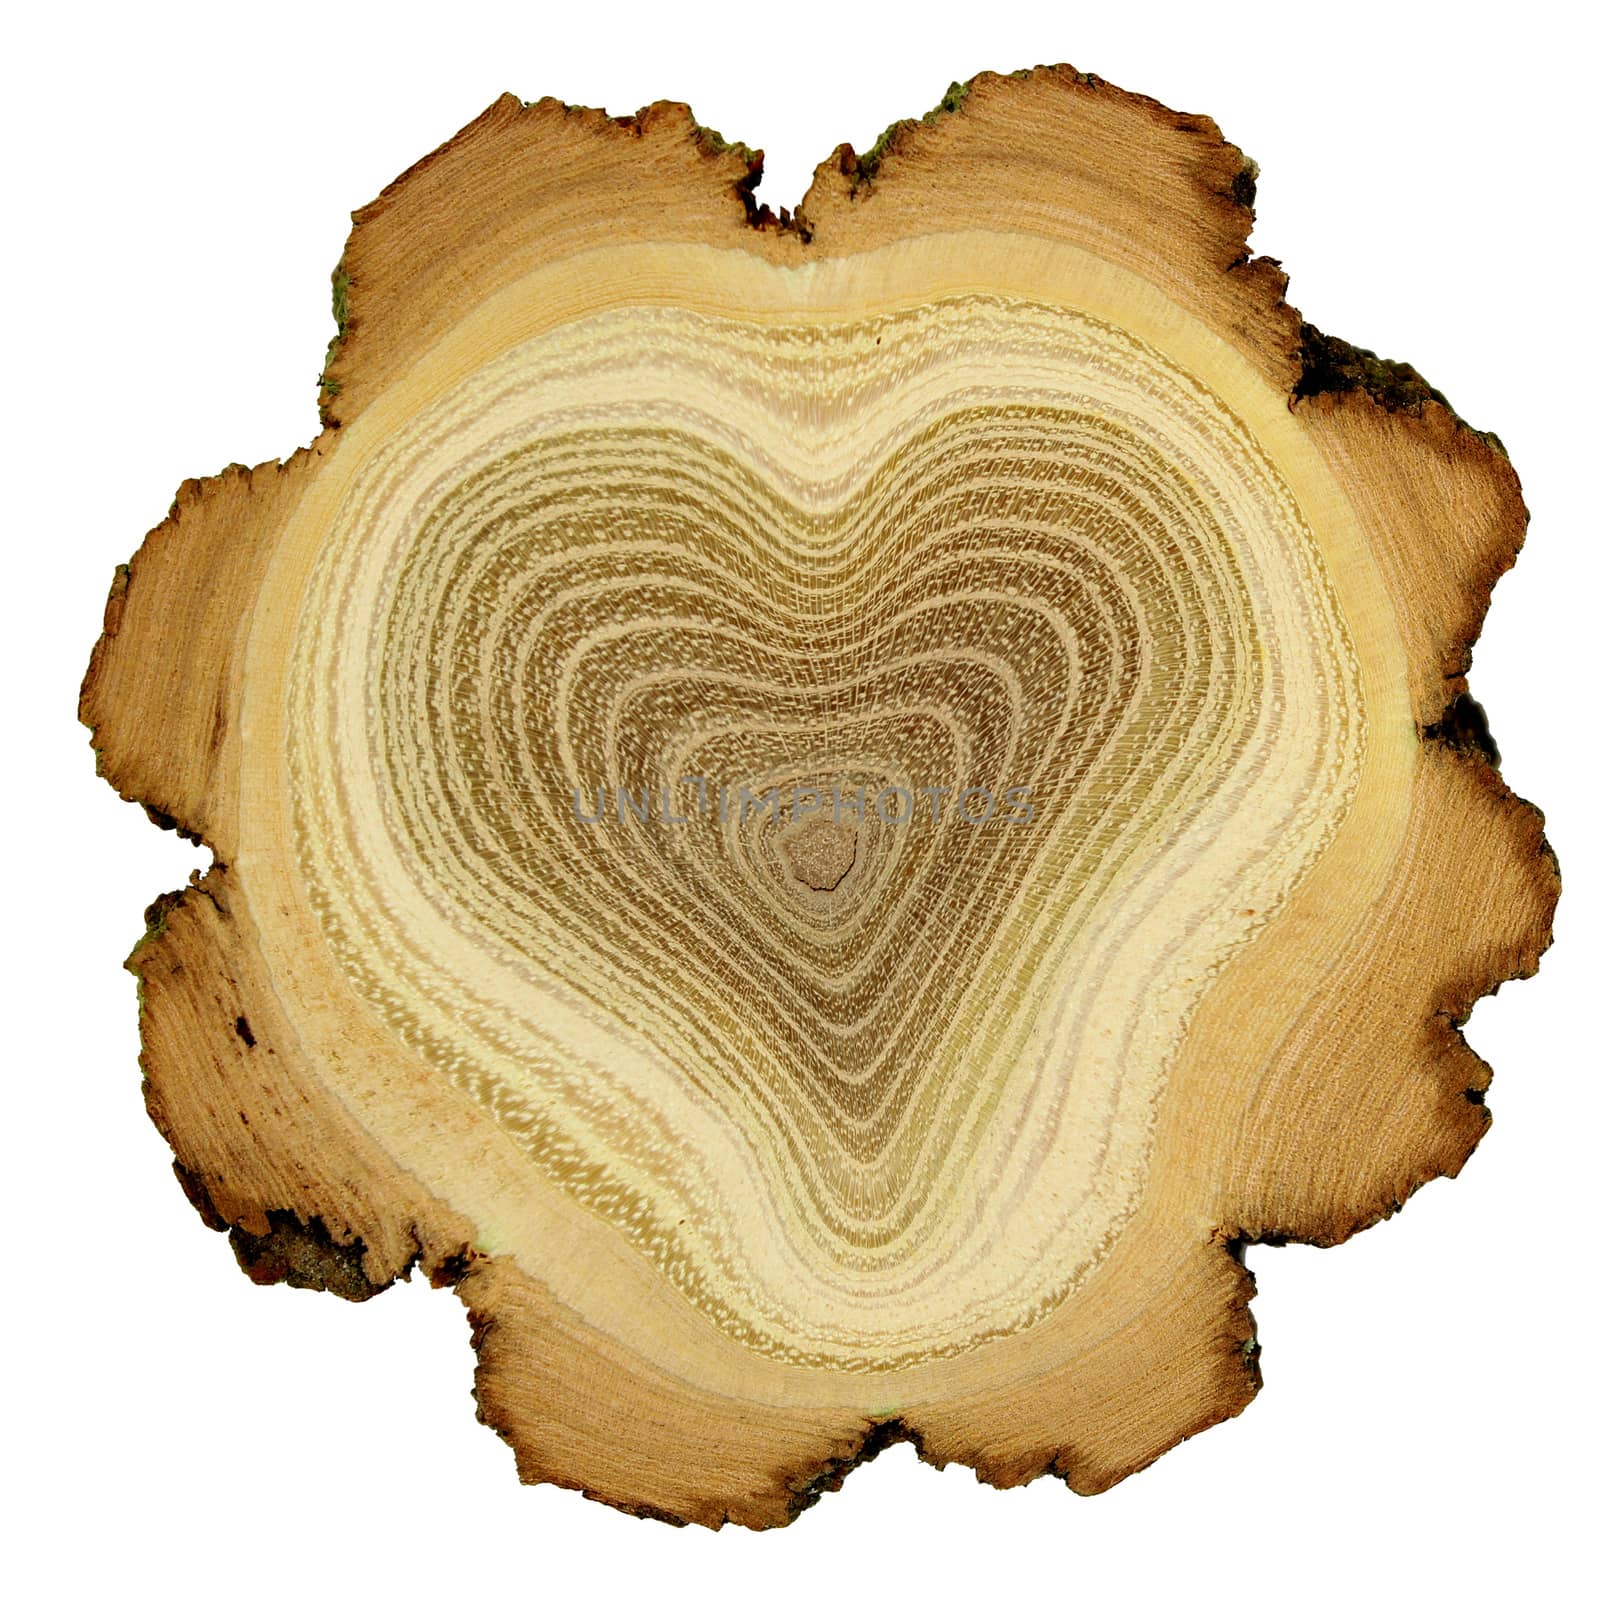 Heart of tree - growth rings of acacia tree - cross section by DeoSum